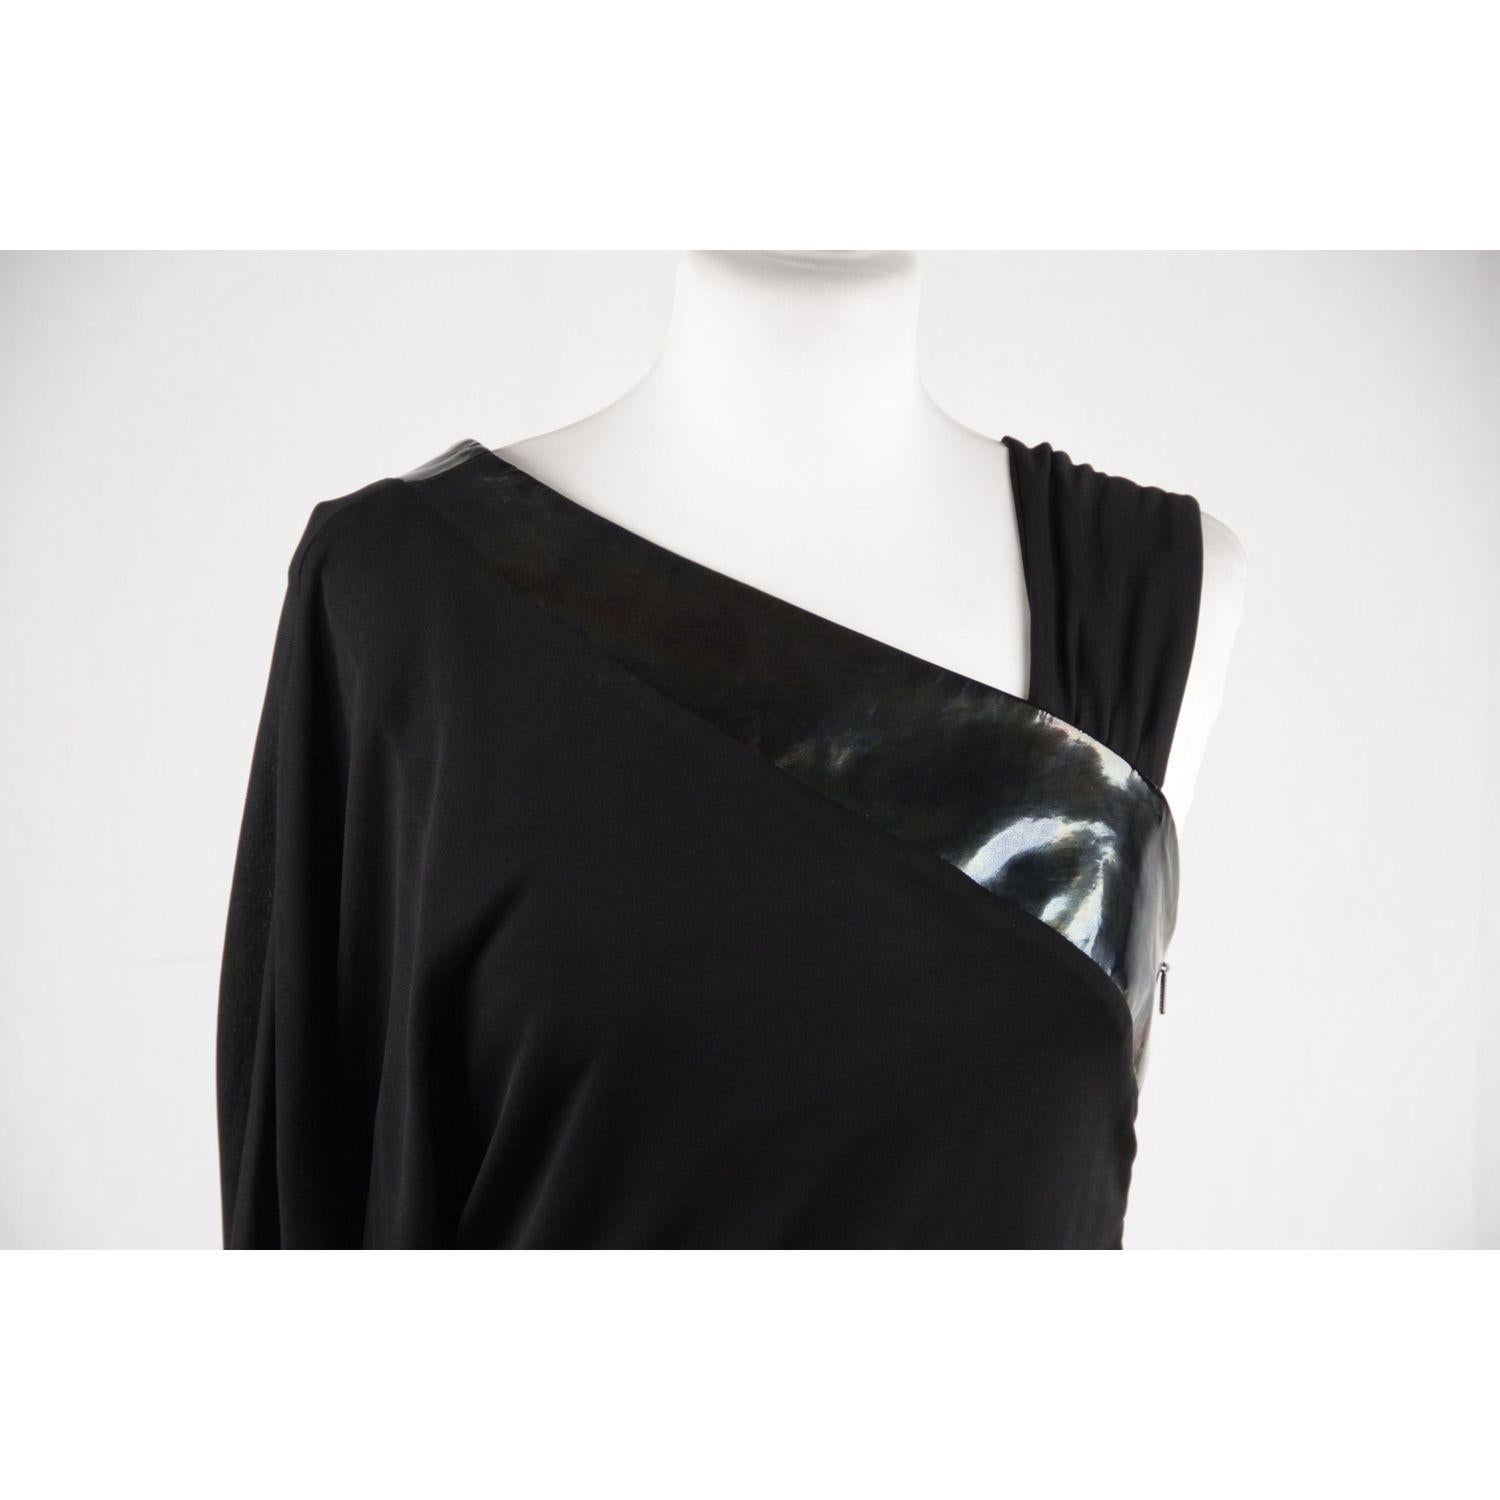 Gucci Black Jersey Asymmetric Top with Patent Leather Trim Size 42 2